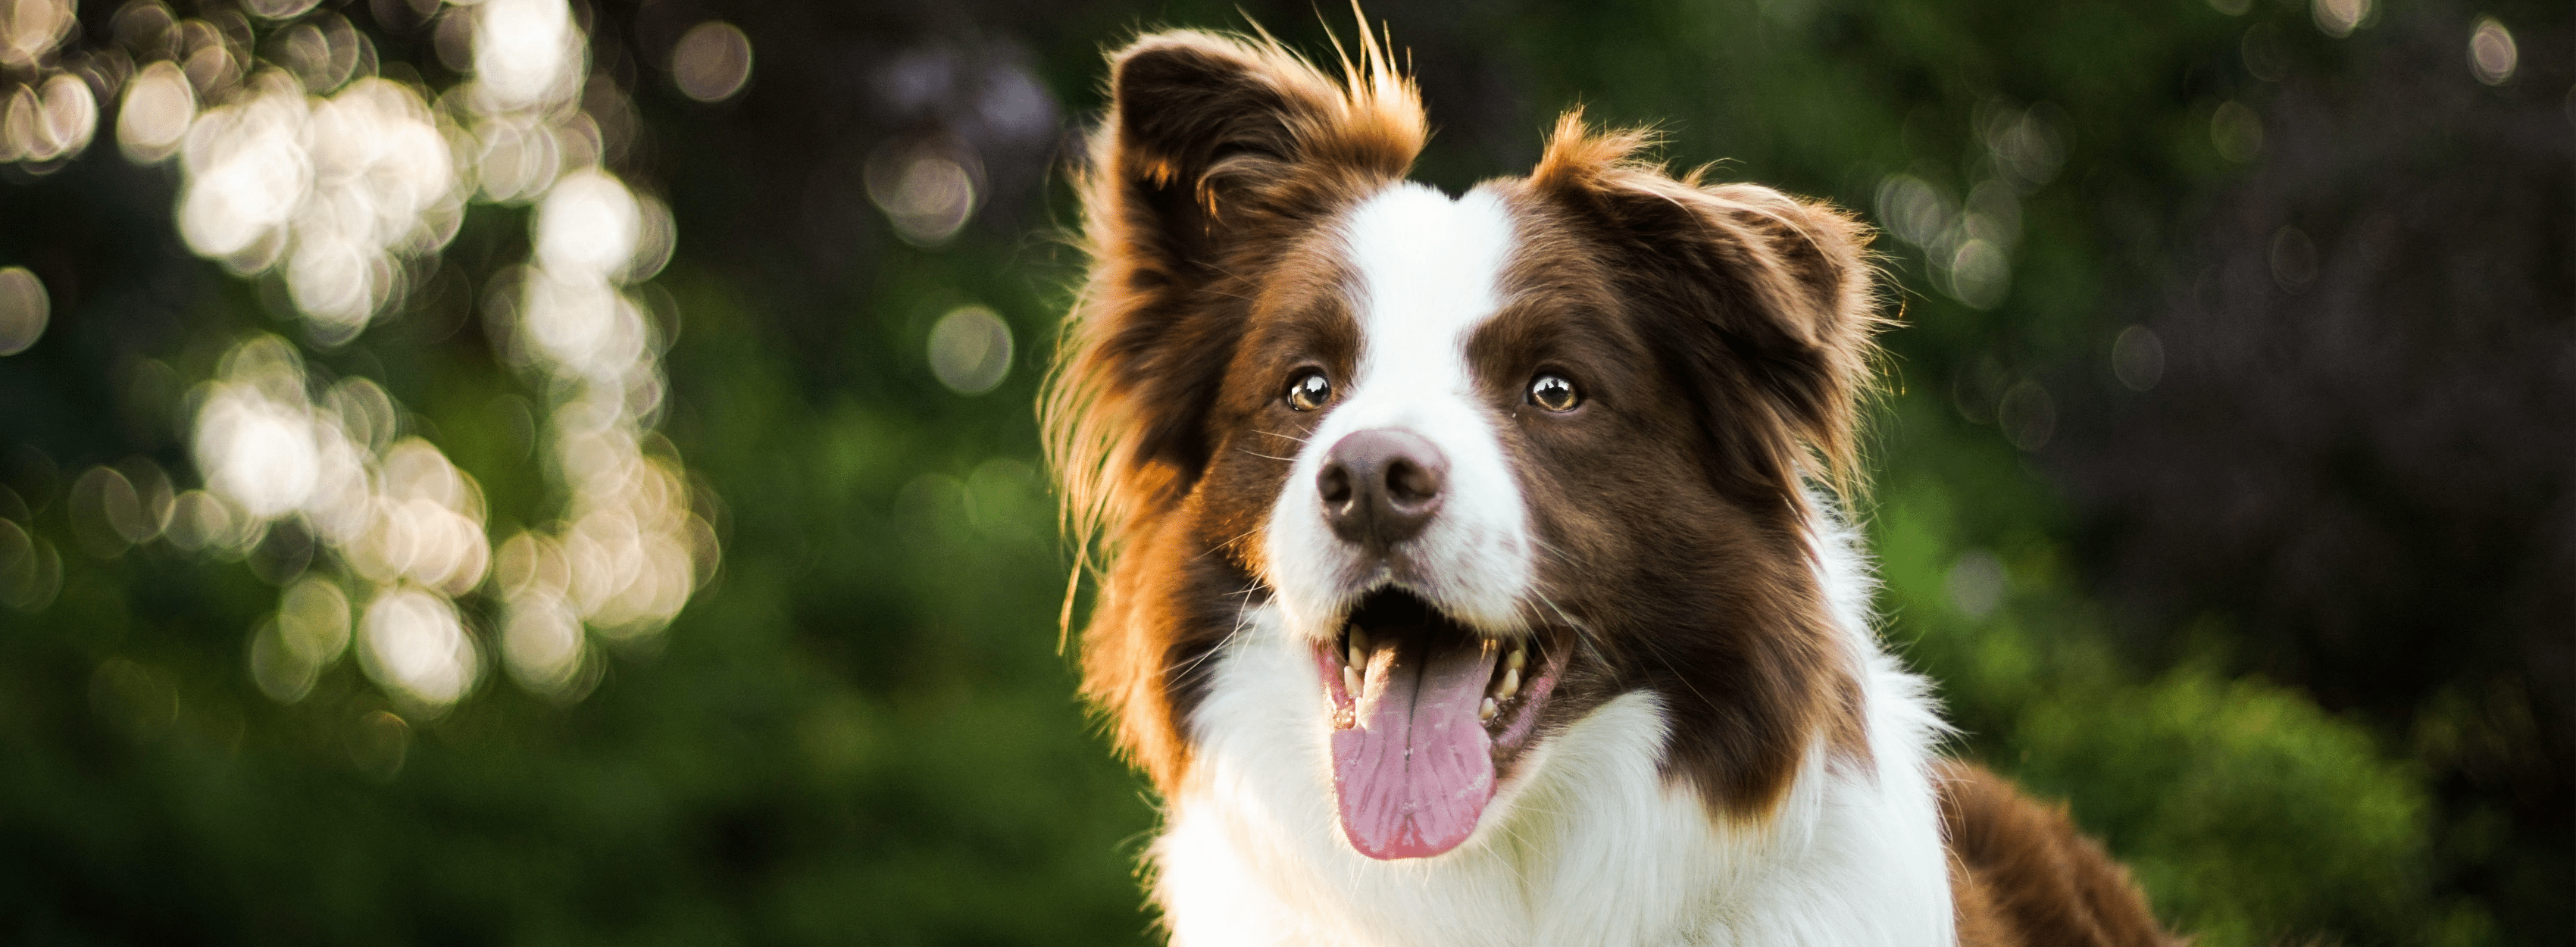 Brown and white dog with tongue out outdoors.